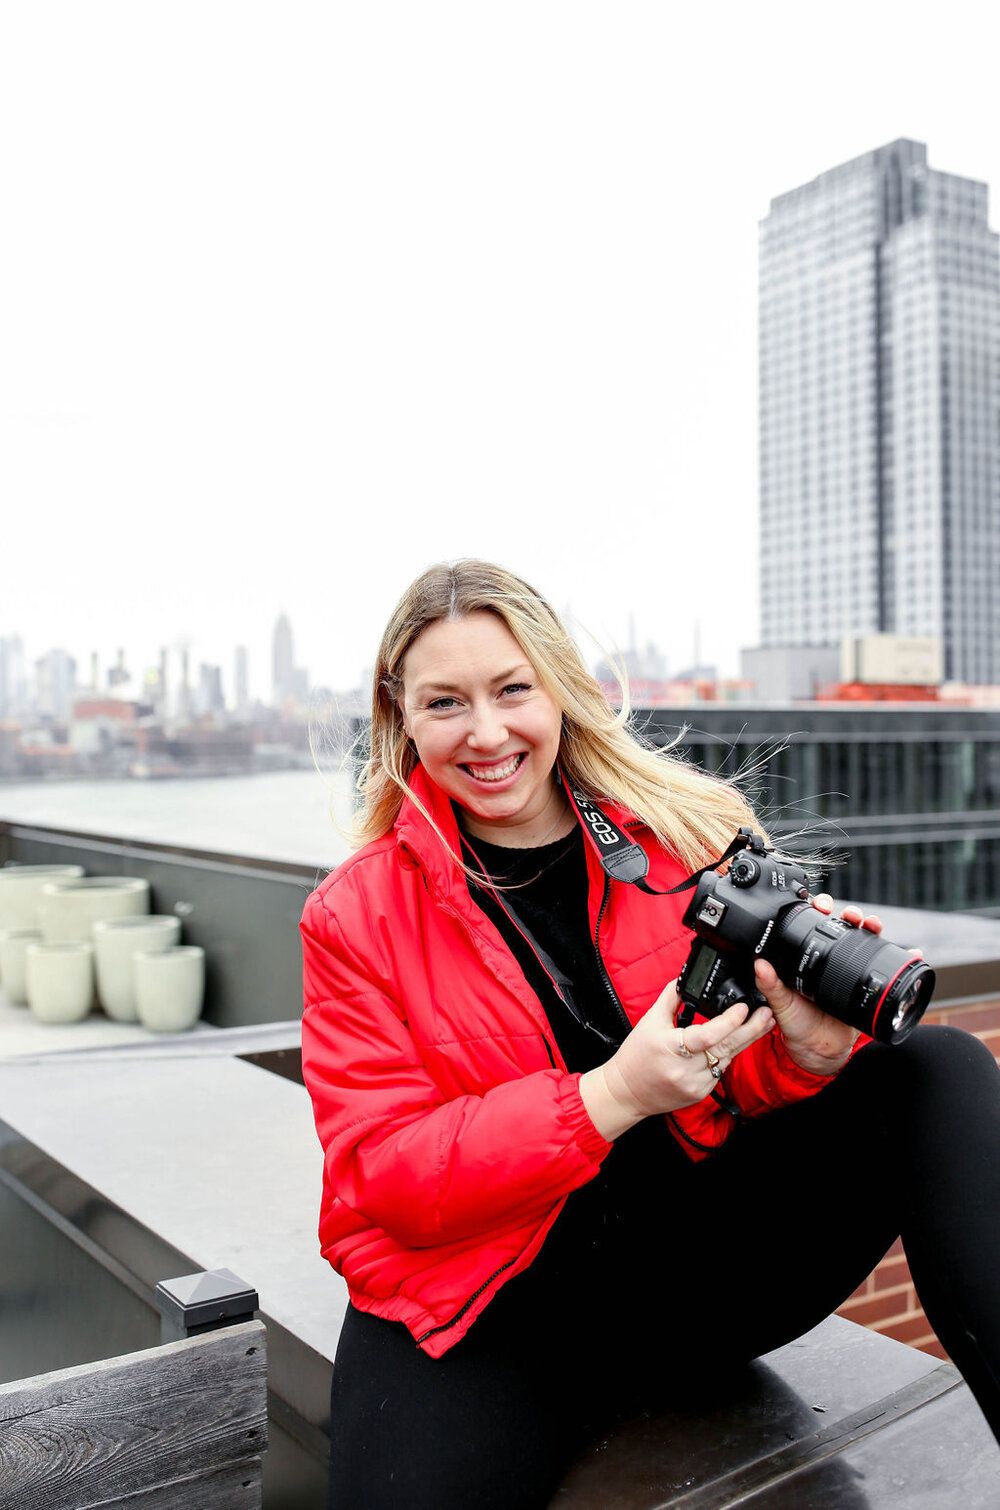 sharing my camera gear sitting with canon camera on NYC rooftop